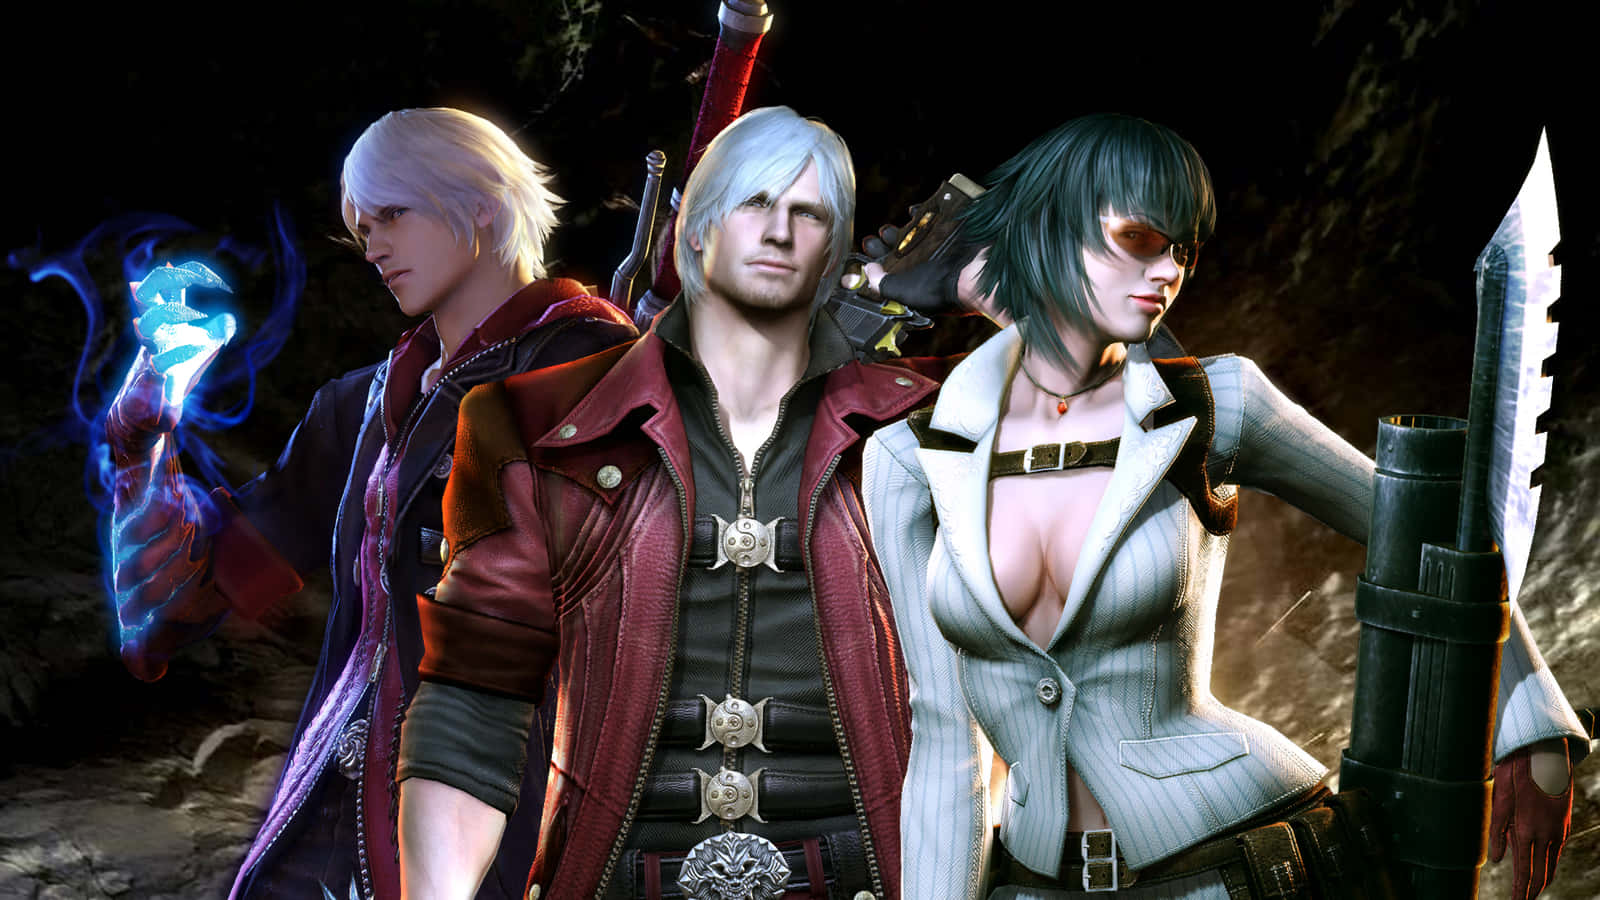 The Legendary Devil Hunters - Devil May Cry Characters Wallpaper